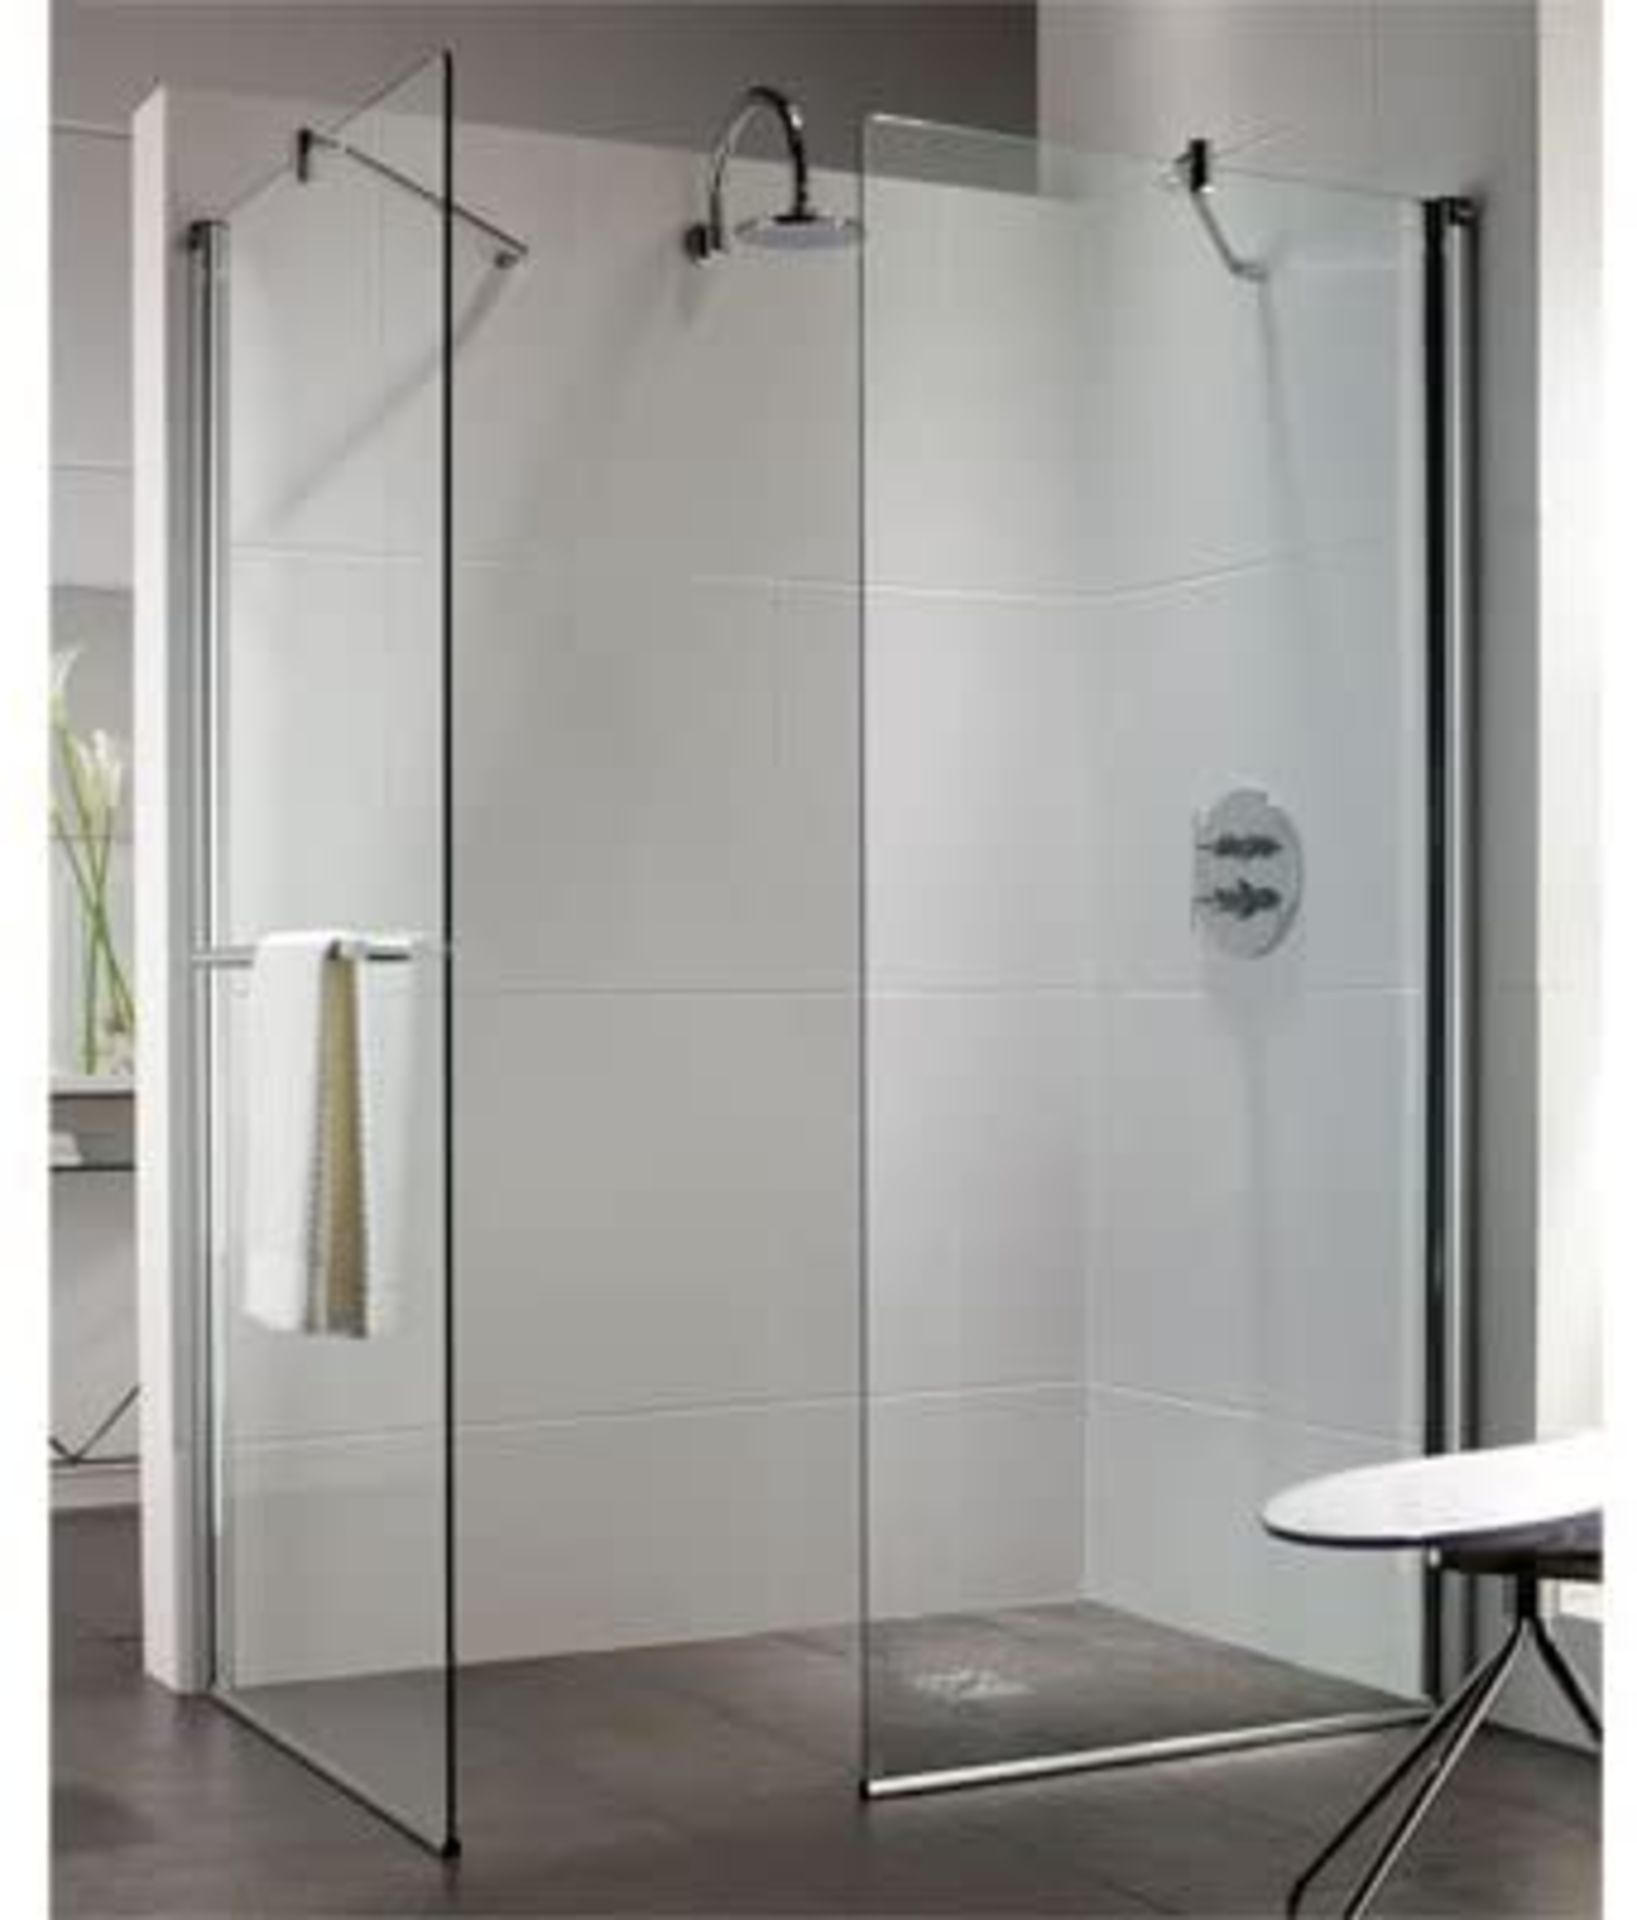 NEW Twyfords 1100x800mm Walk In Shower Enclosure. Hydr8 Walk In Flat Panel LEFT HAND Or RIGHT H...